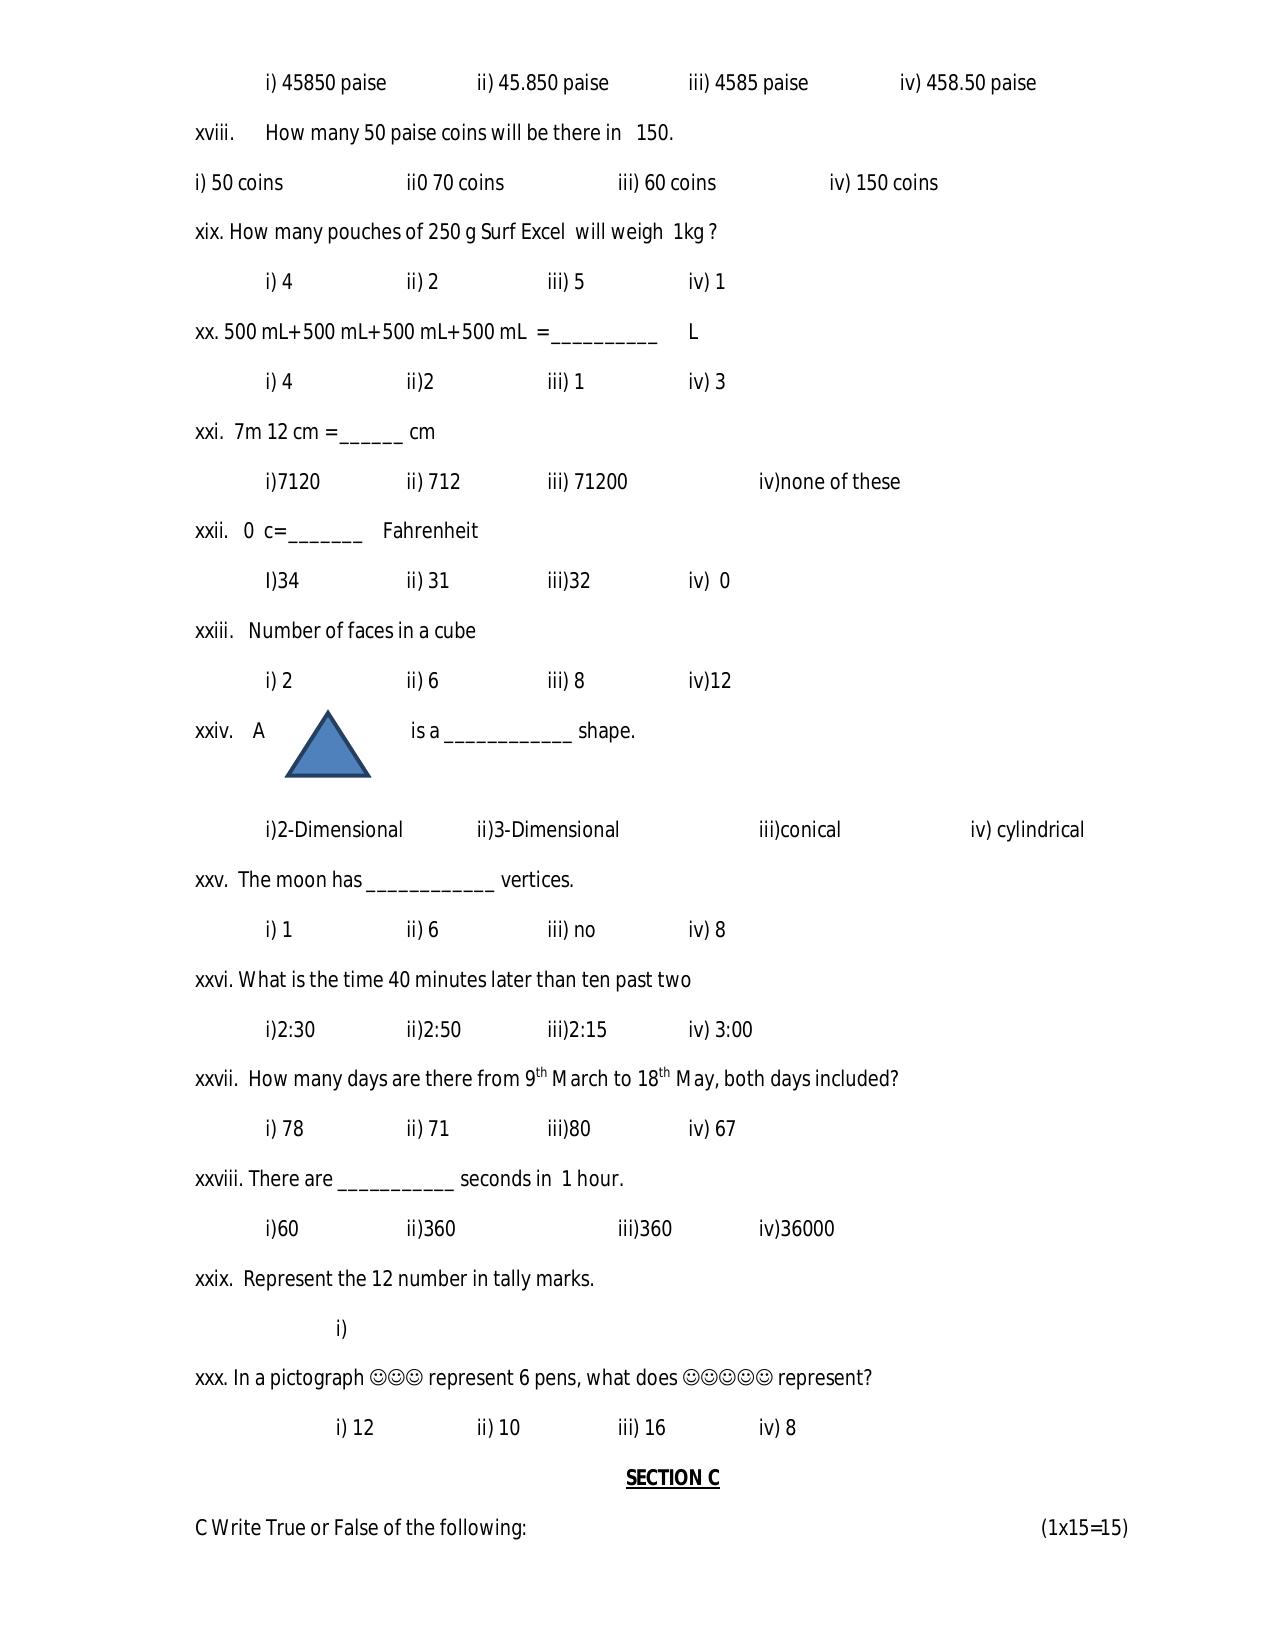 Worksheet for Class 5 Maths Assignment 15 - Page 3